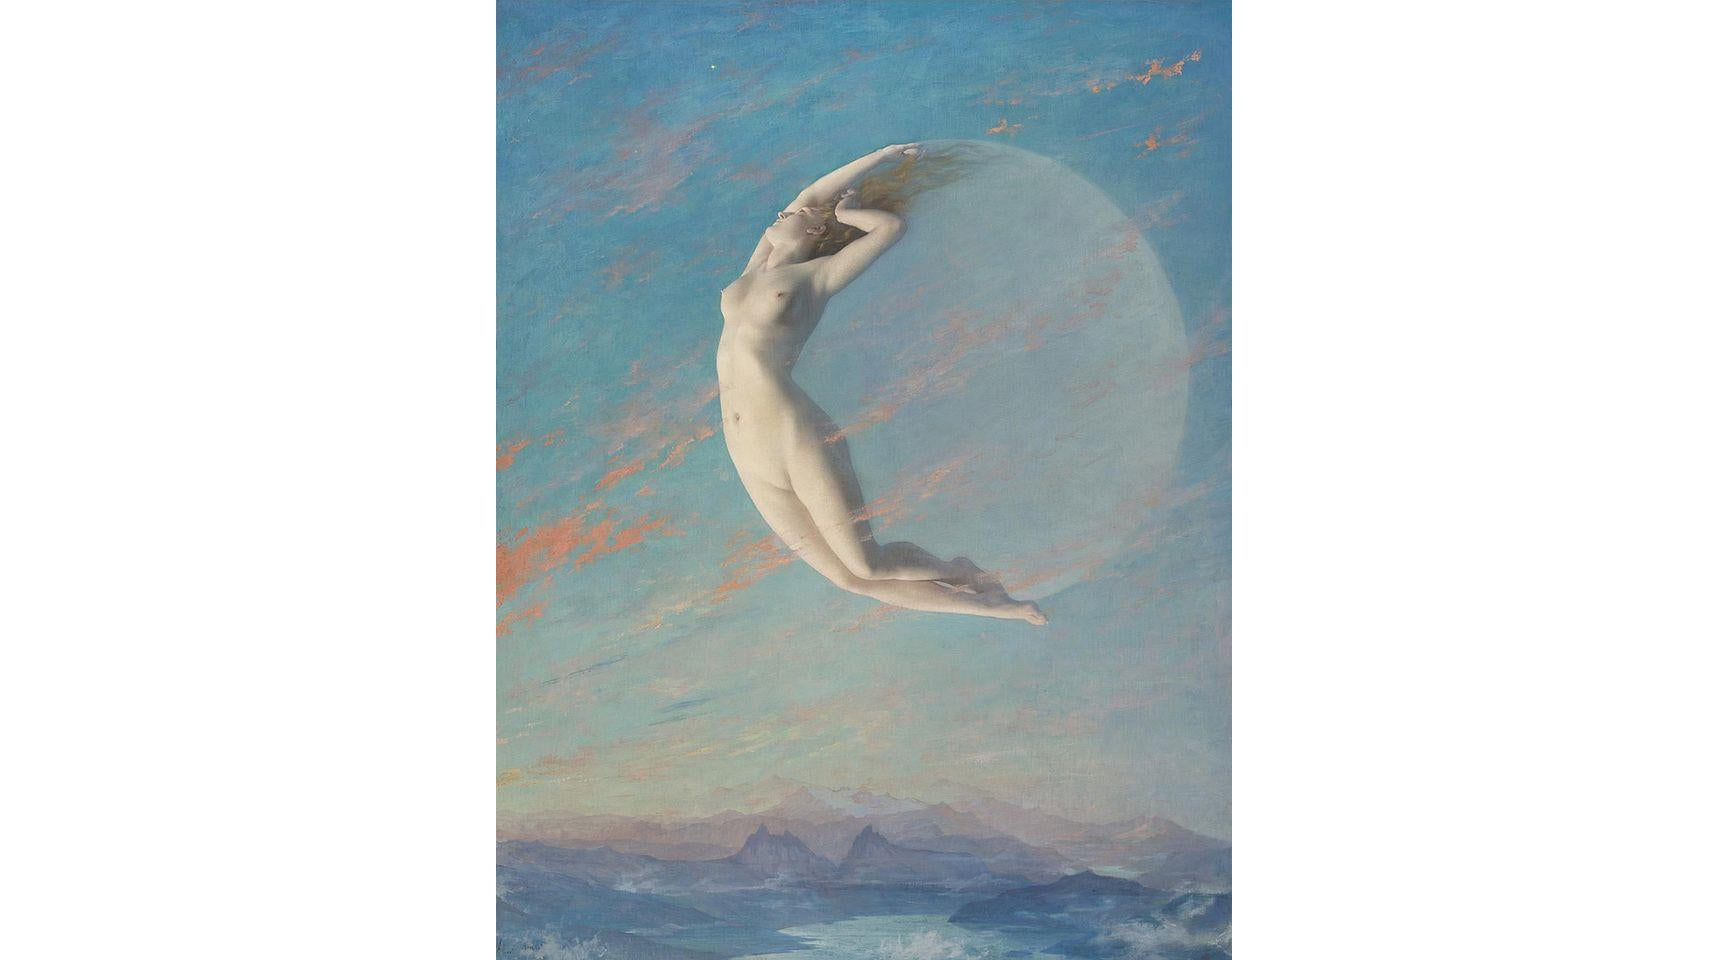 Albert Aublet, Selene, around 1880 — Be a woman of the moon